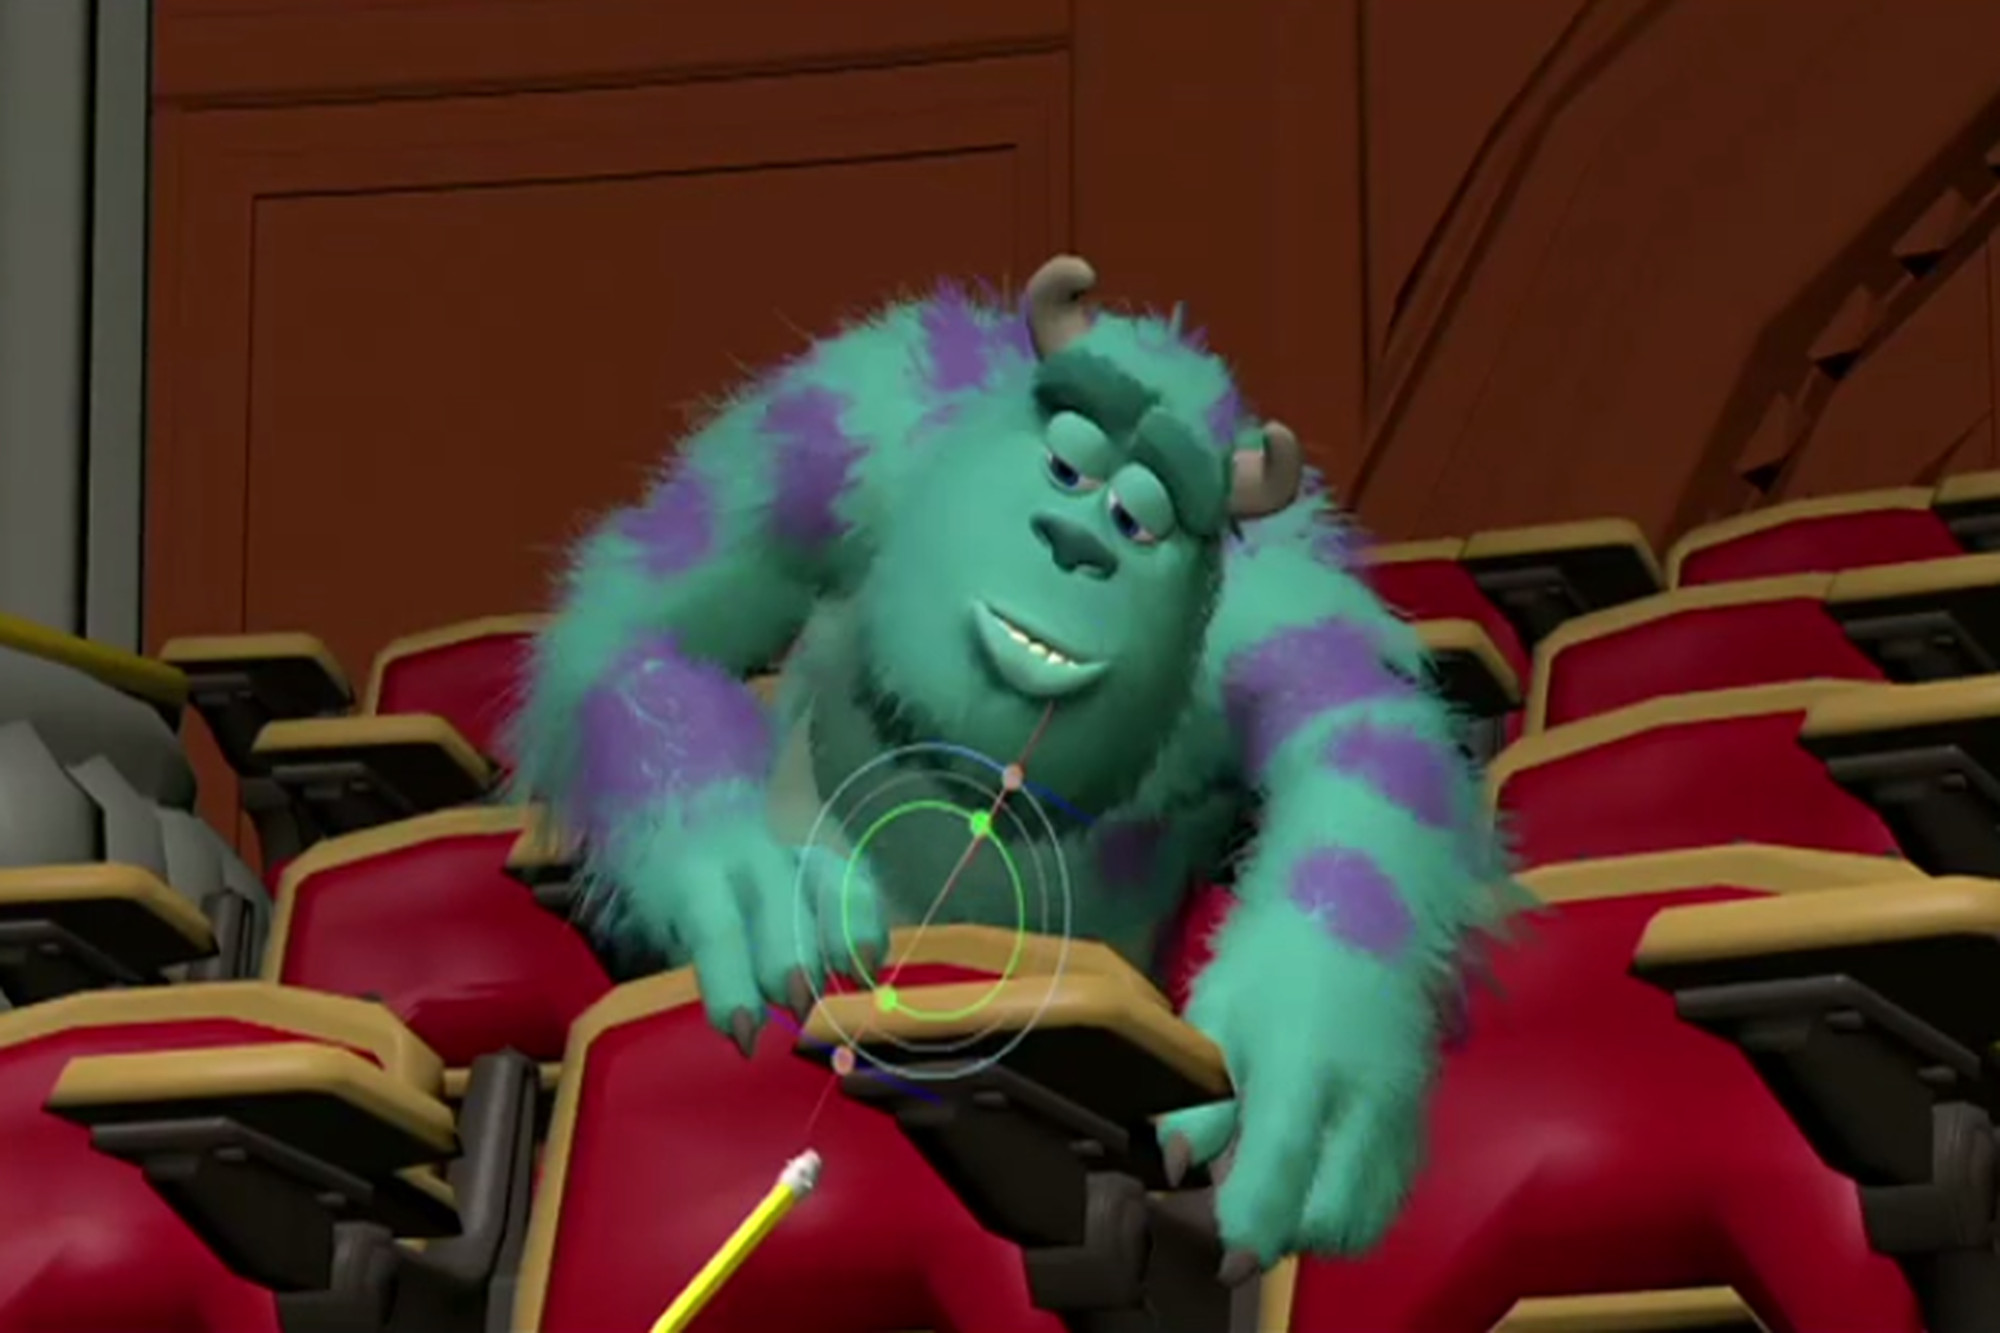 Pixar gives a closer look at how it animates big hairy monsters - The Verge